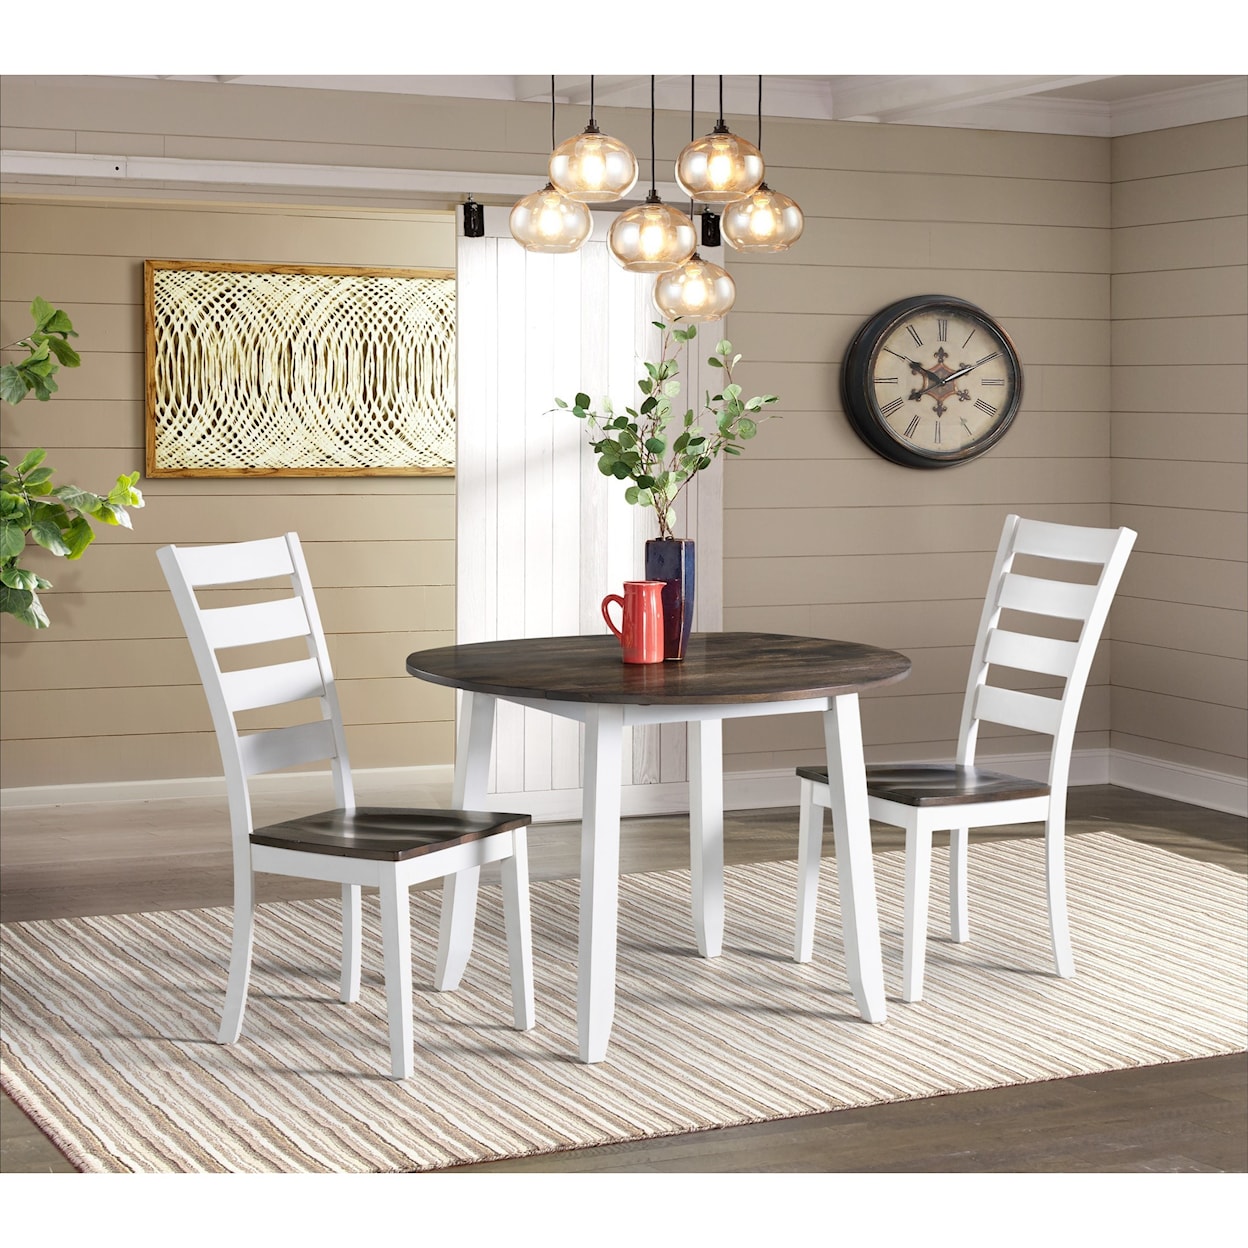 Belfort Select Cabin Creek Drop Leaf Dining Table and Chair Set